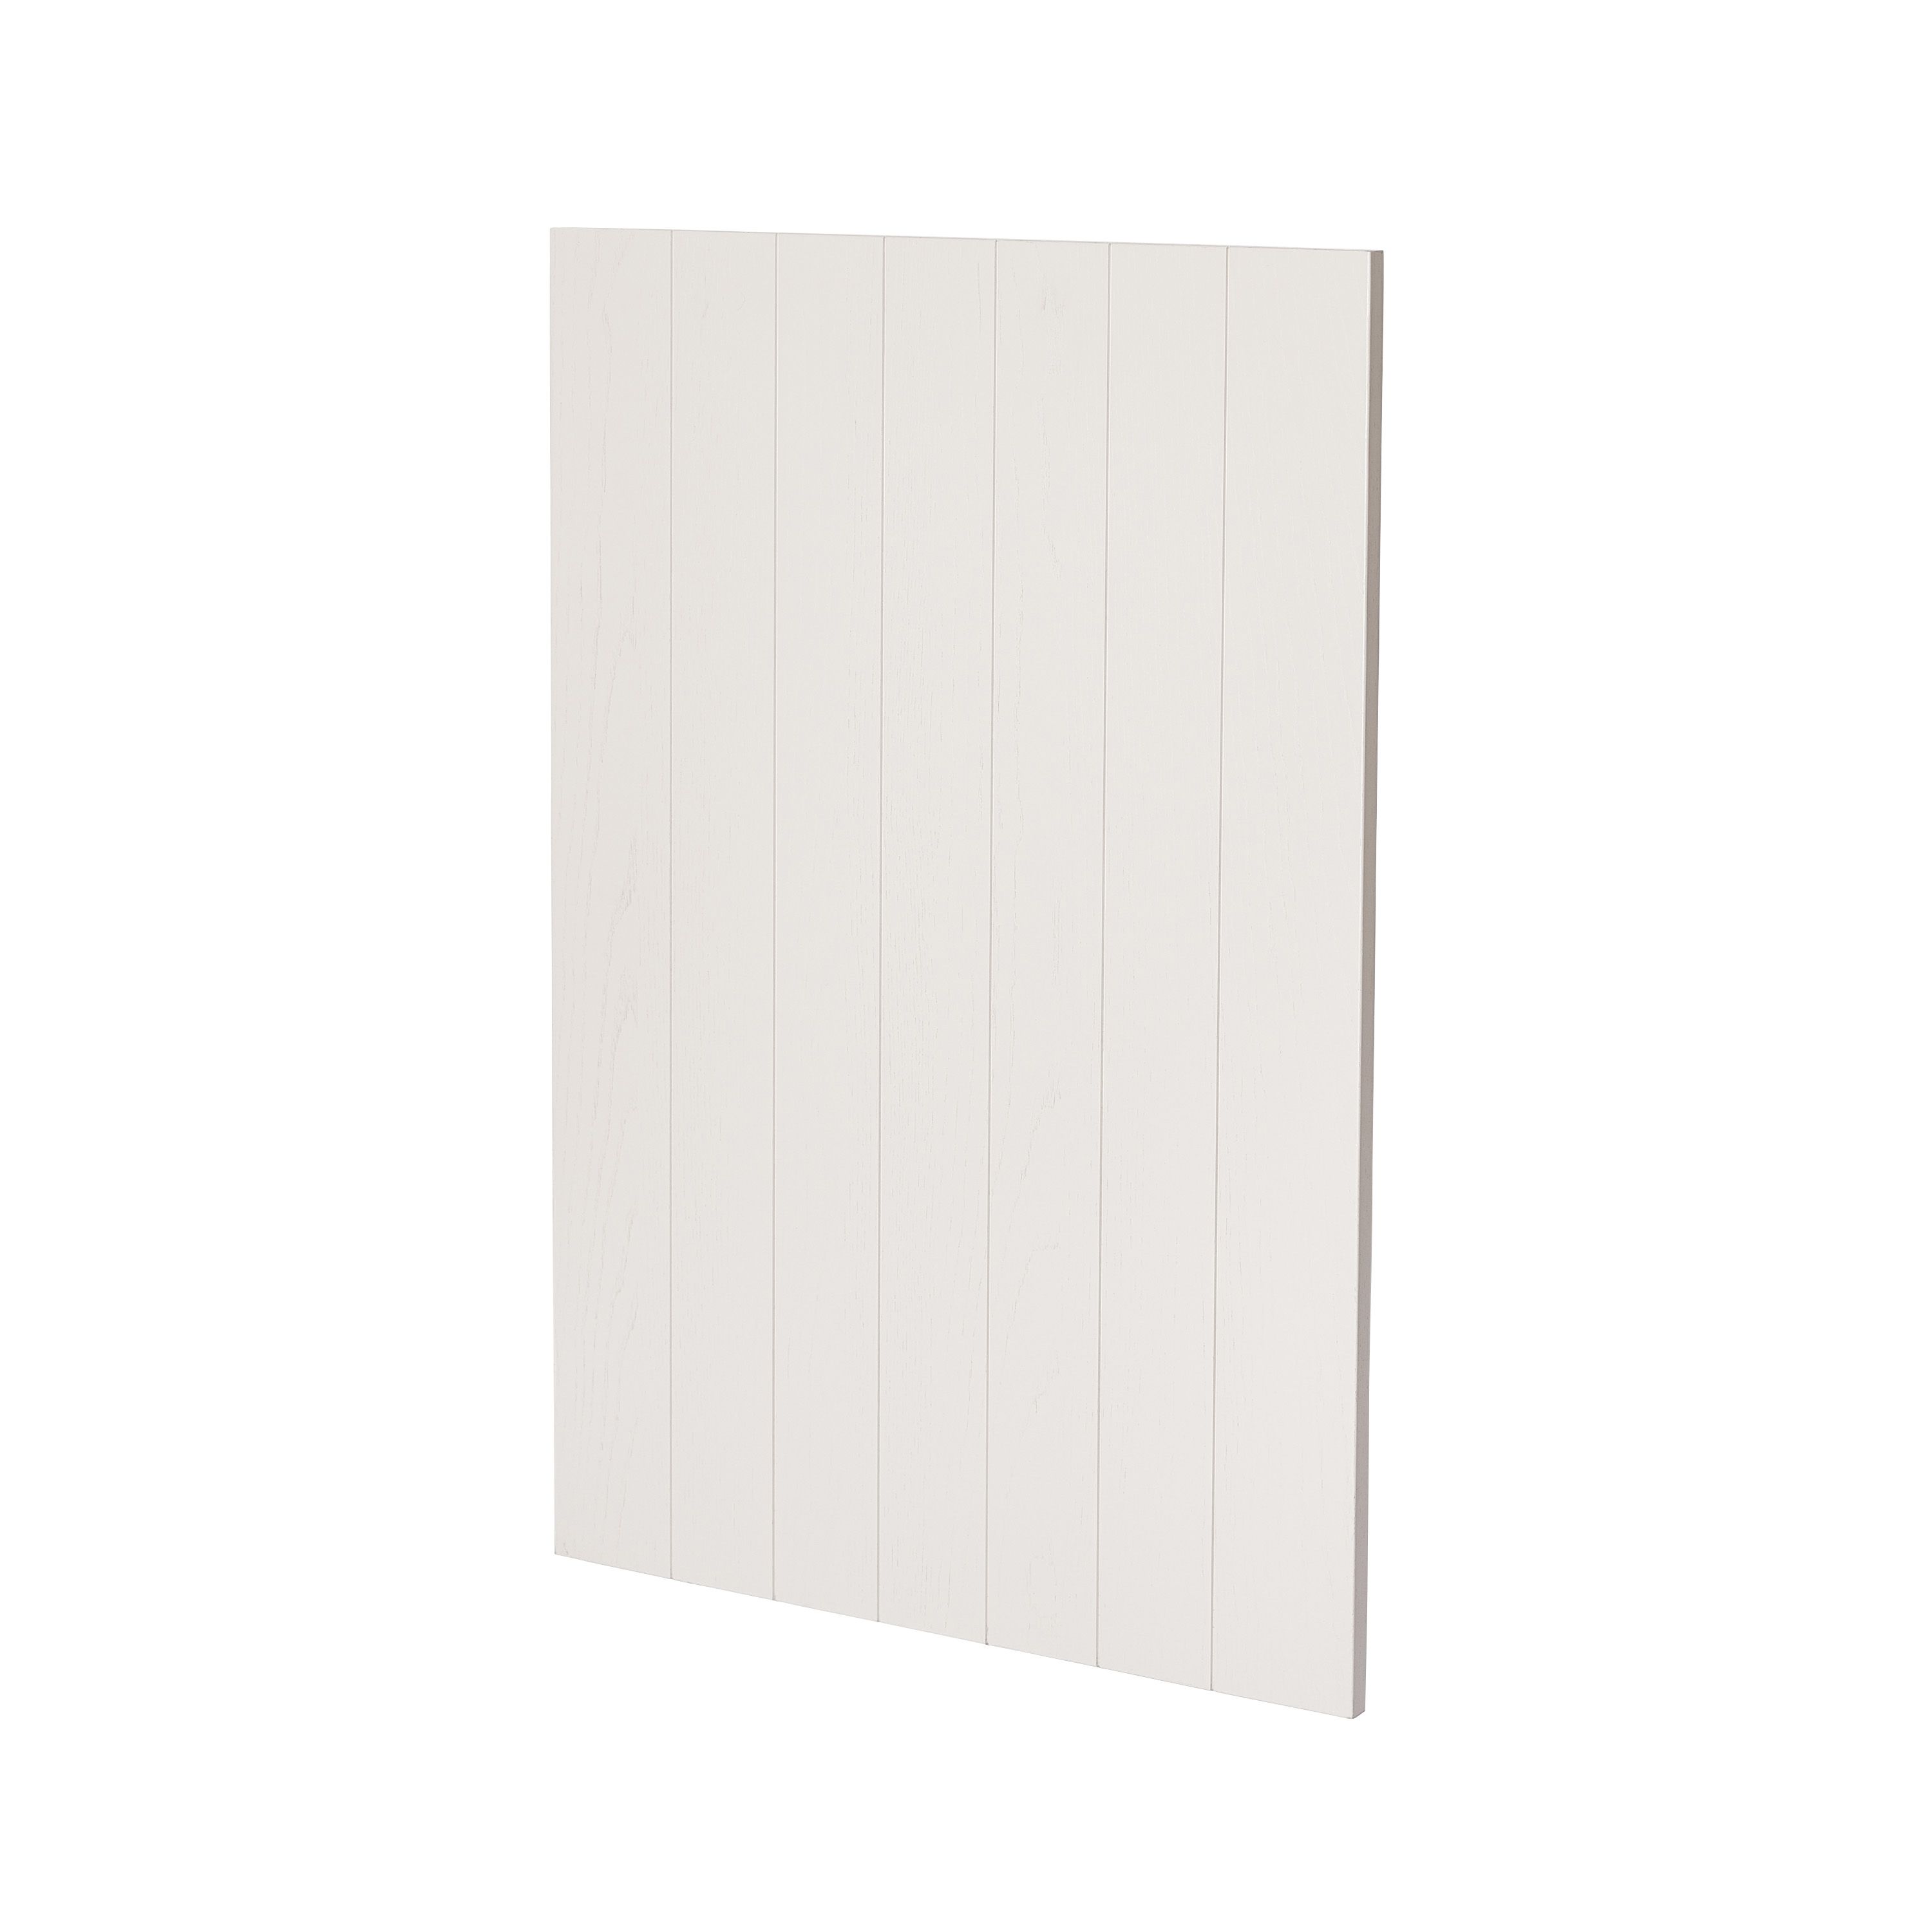 GoodHome Verbena Matt cashmere painted natural ash shaker Standard Clad on end panel (H)934mm (W)640mm